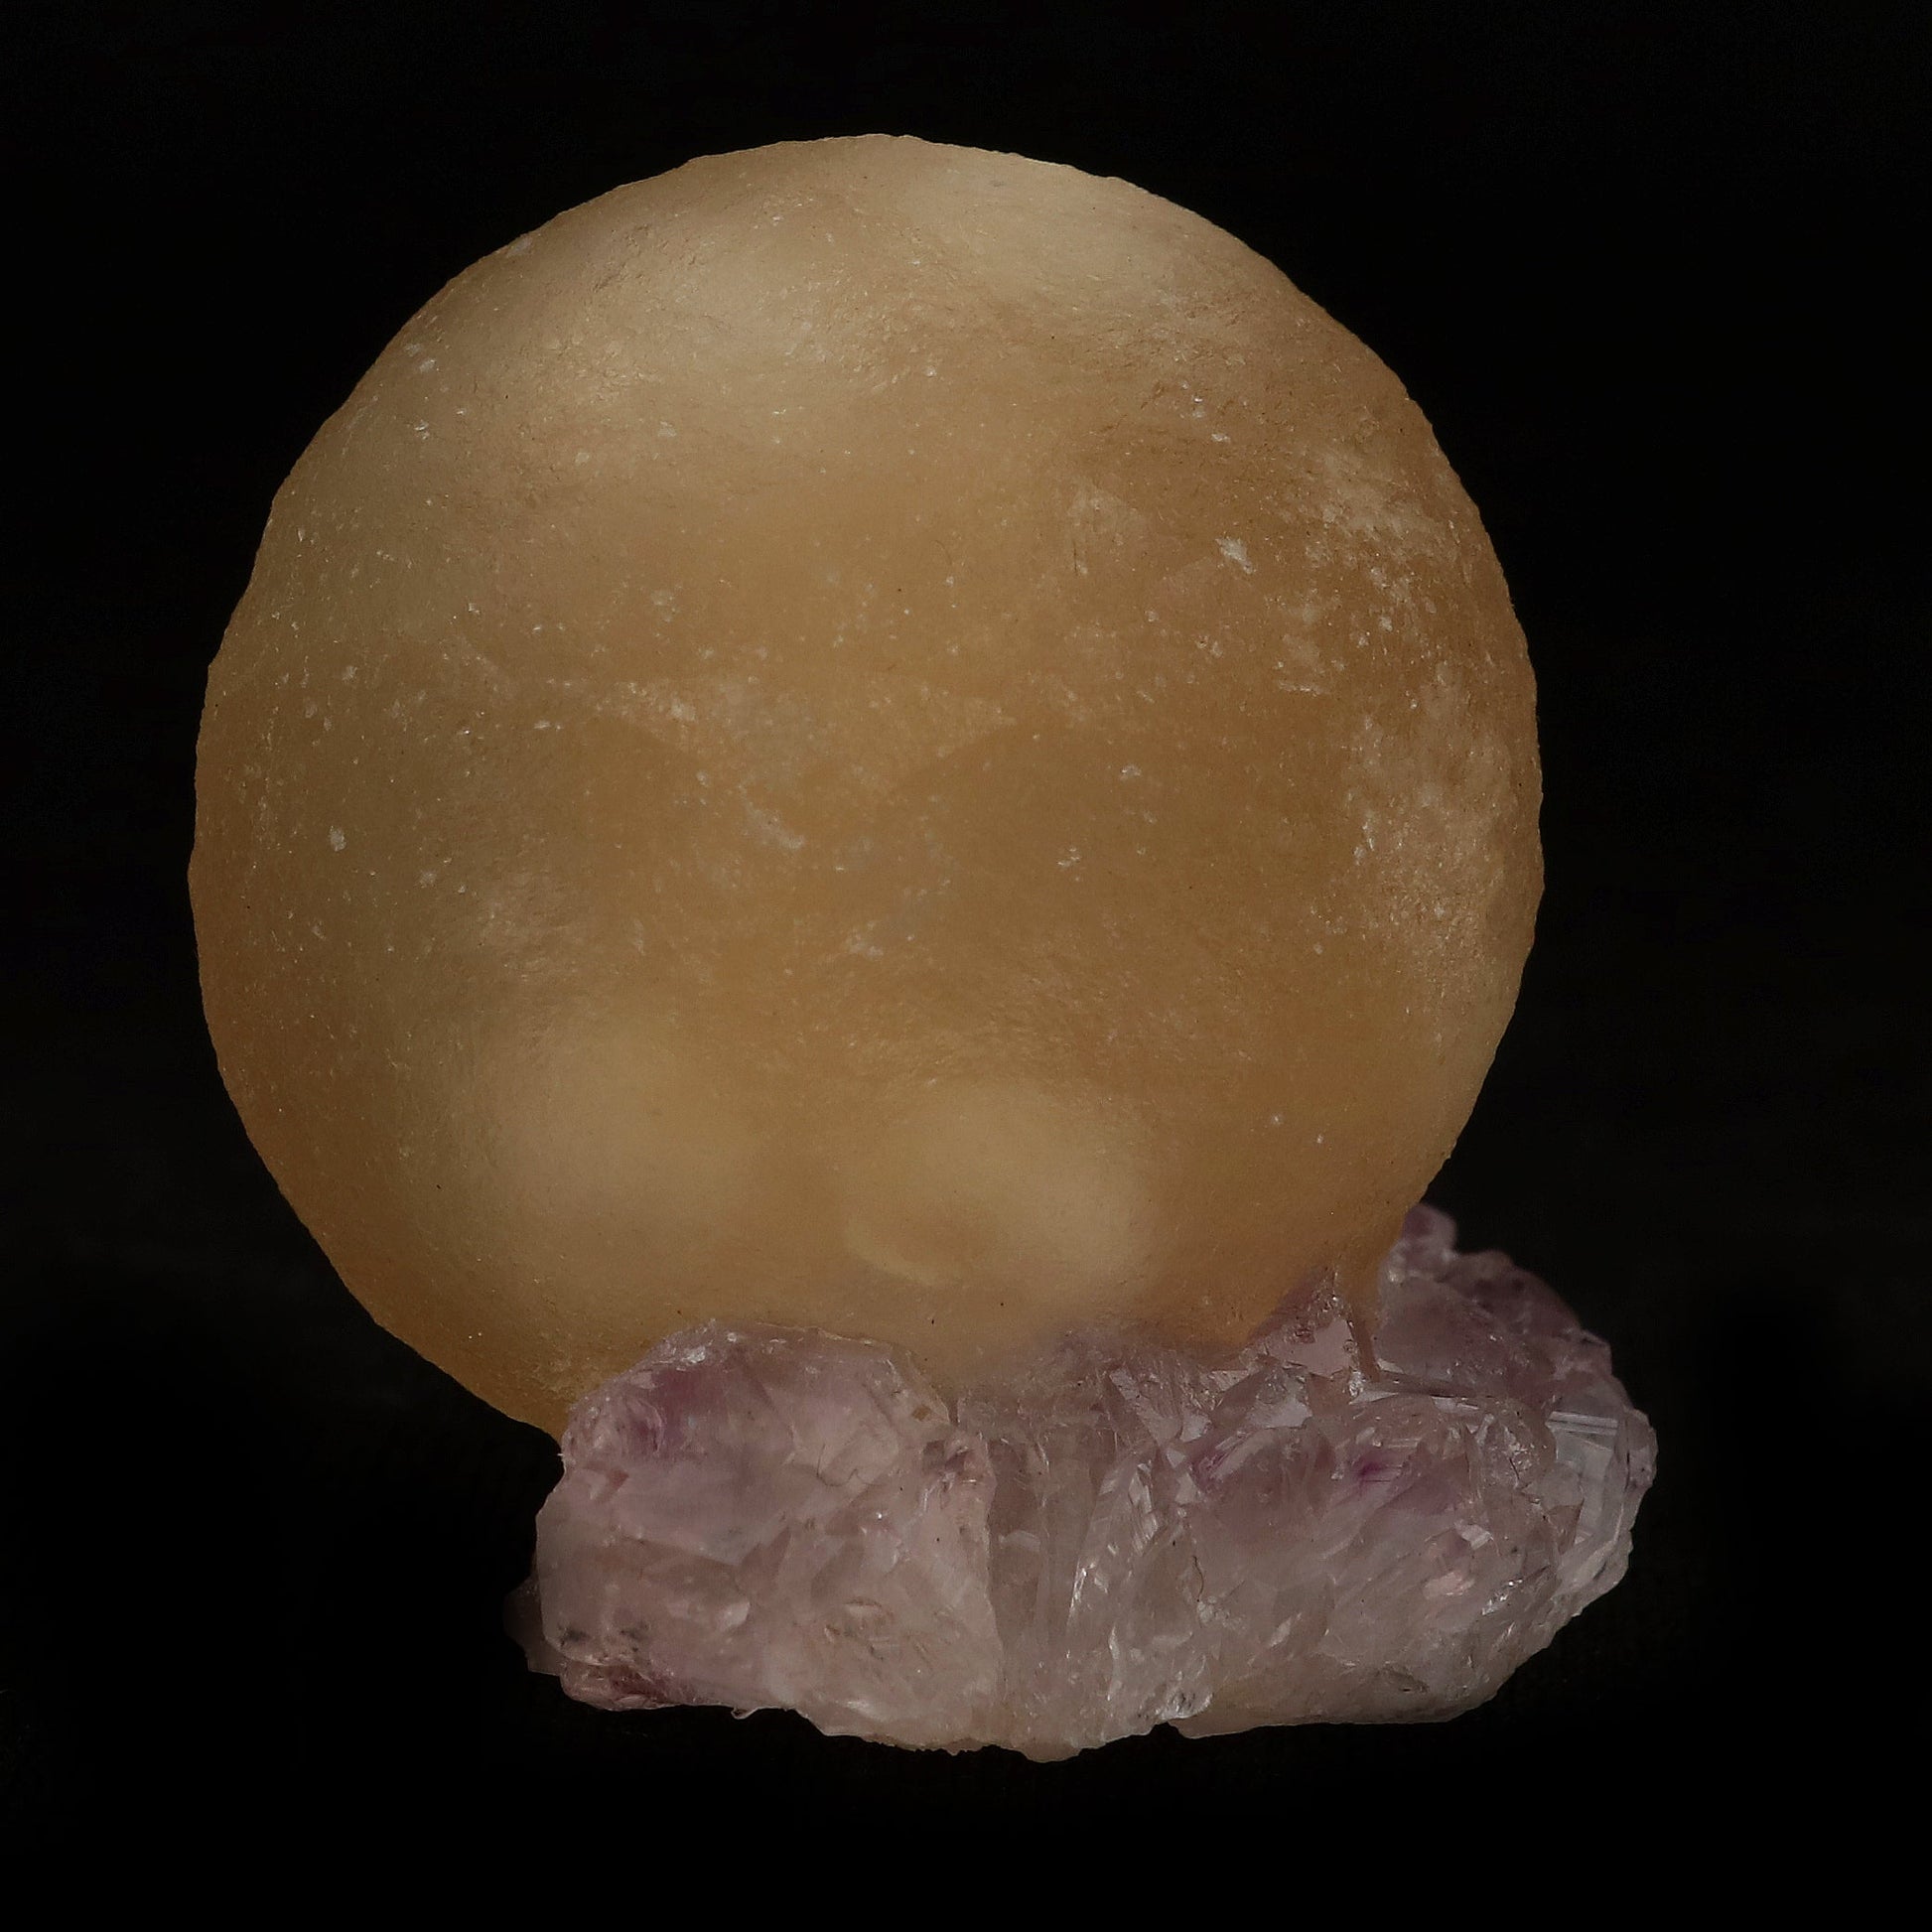 Fluorite Botryoidal on Amethyst Natural Mineral Specimen # B 5078  https://www.superbminerals.us/products/fluorite-botryoidal-on-amethyst-natural-mineral-specimen-b-5078  Features: An extraordinarily botryoidal "ball" of Fluorite is perched atop an exceptionally rich purple coloured Amethyst on Chalcedony and host rock matrix, creating an unusually beautiful specimen.&nbsp; On the surface, the Fluorite is a creamy-white tone that gradually fades away to a golden hue in the middle.